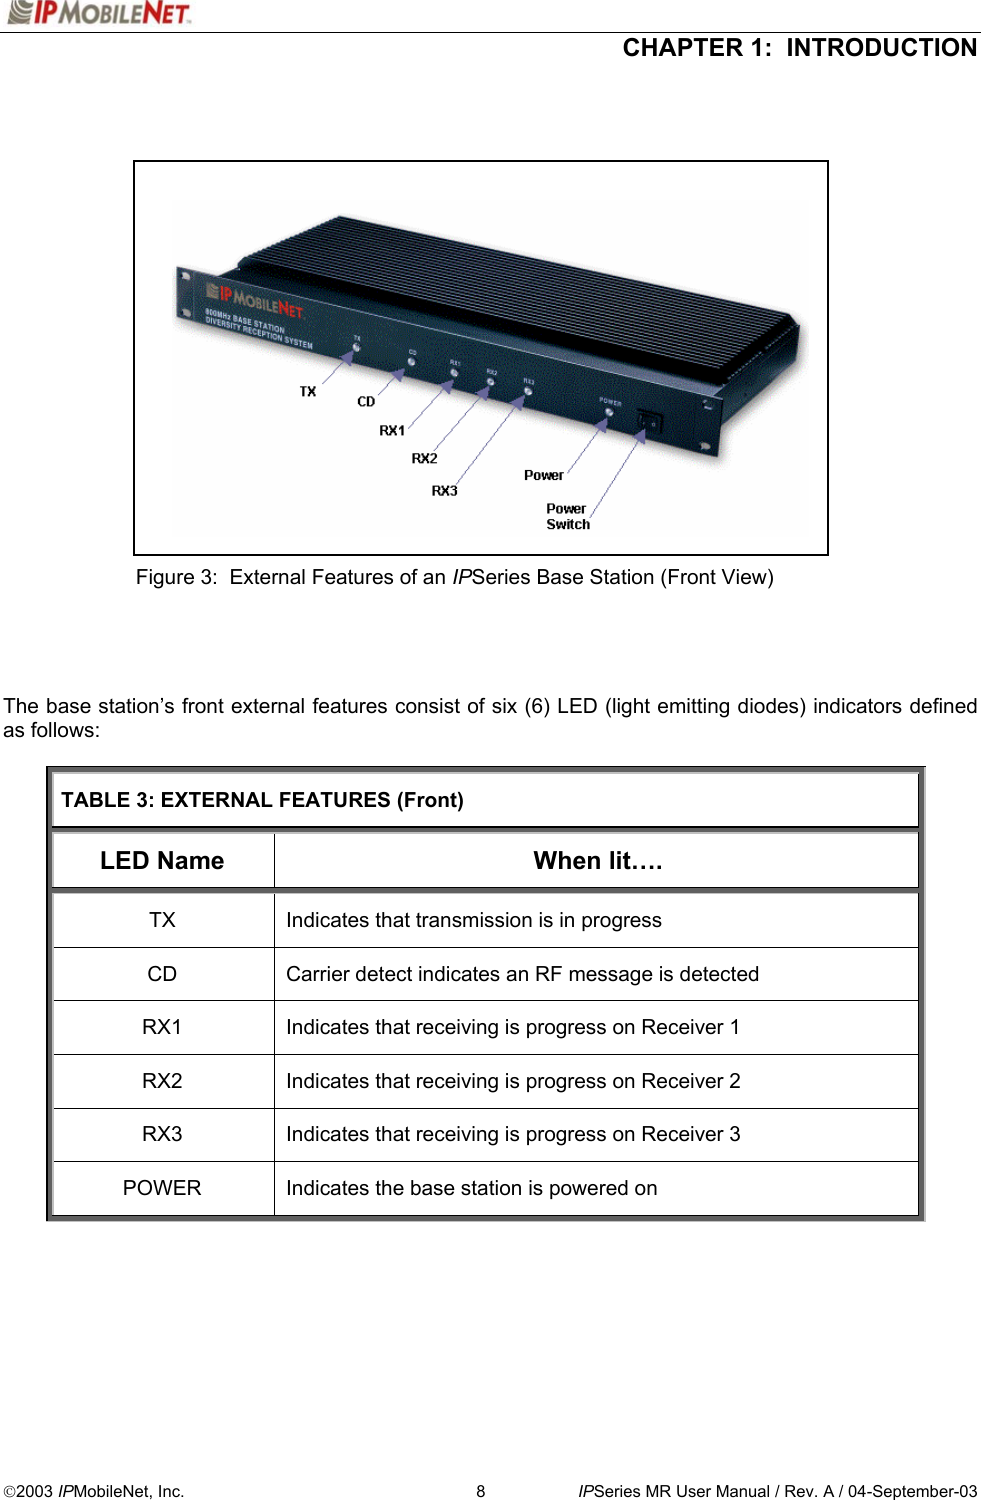  CHAPTER 1:  INTRODUCTION  2003 IPMobileNet, Inc.  8  IPSeries MR User Manual / Rev. A / 04-September-03                             Figure 3:  External Features of an IPSeries Base Station (Front View)     The base station’s front external features consist of six (6) LED (light emitting diodes) indicators defined as follows:  TABLE 3: EXTERNAL FEATURES (Front) LED Name  When lit…. TX  Indicates that transmission is in progress CD  Carrier detect indicates an RF message is detected RX1  Indicates that receiving is progress on Receiver 1 RX2  Indicates that receiving is progress on Receiver 2 RX3  Indicates that receiving is progress on Receiver 3 POWER Indicates the base station is powered on 